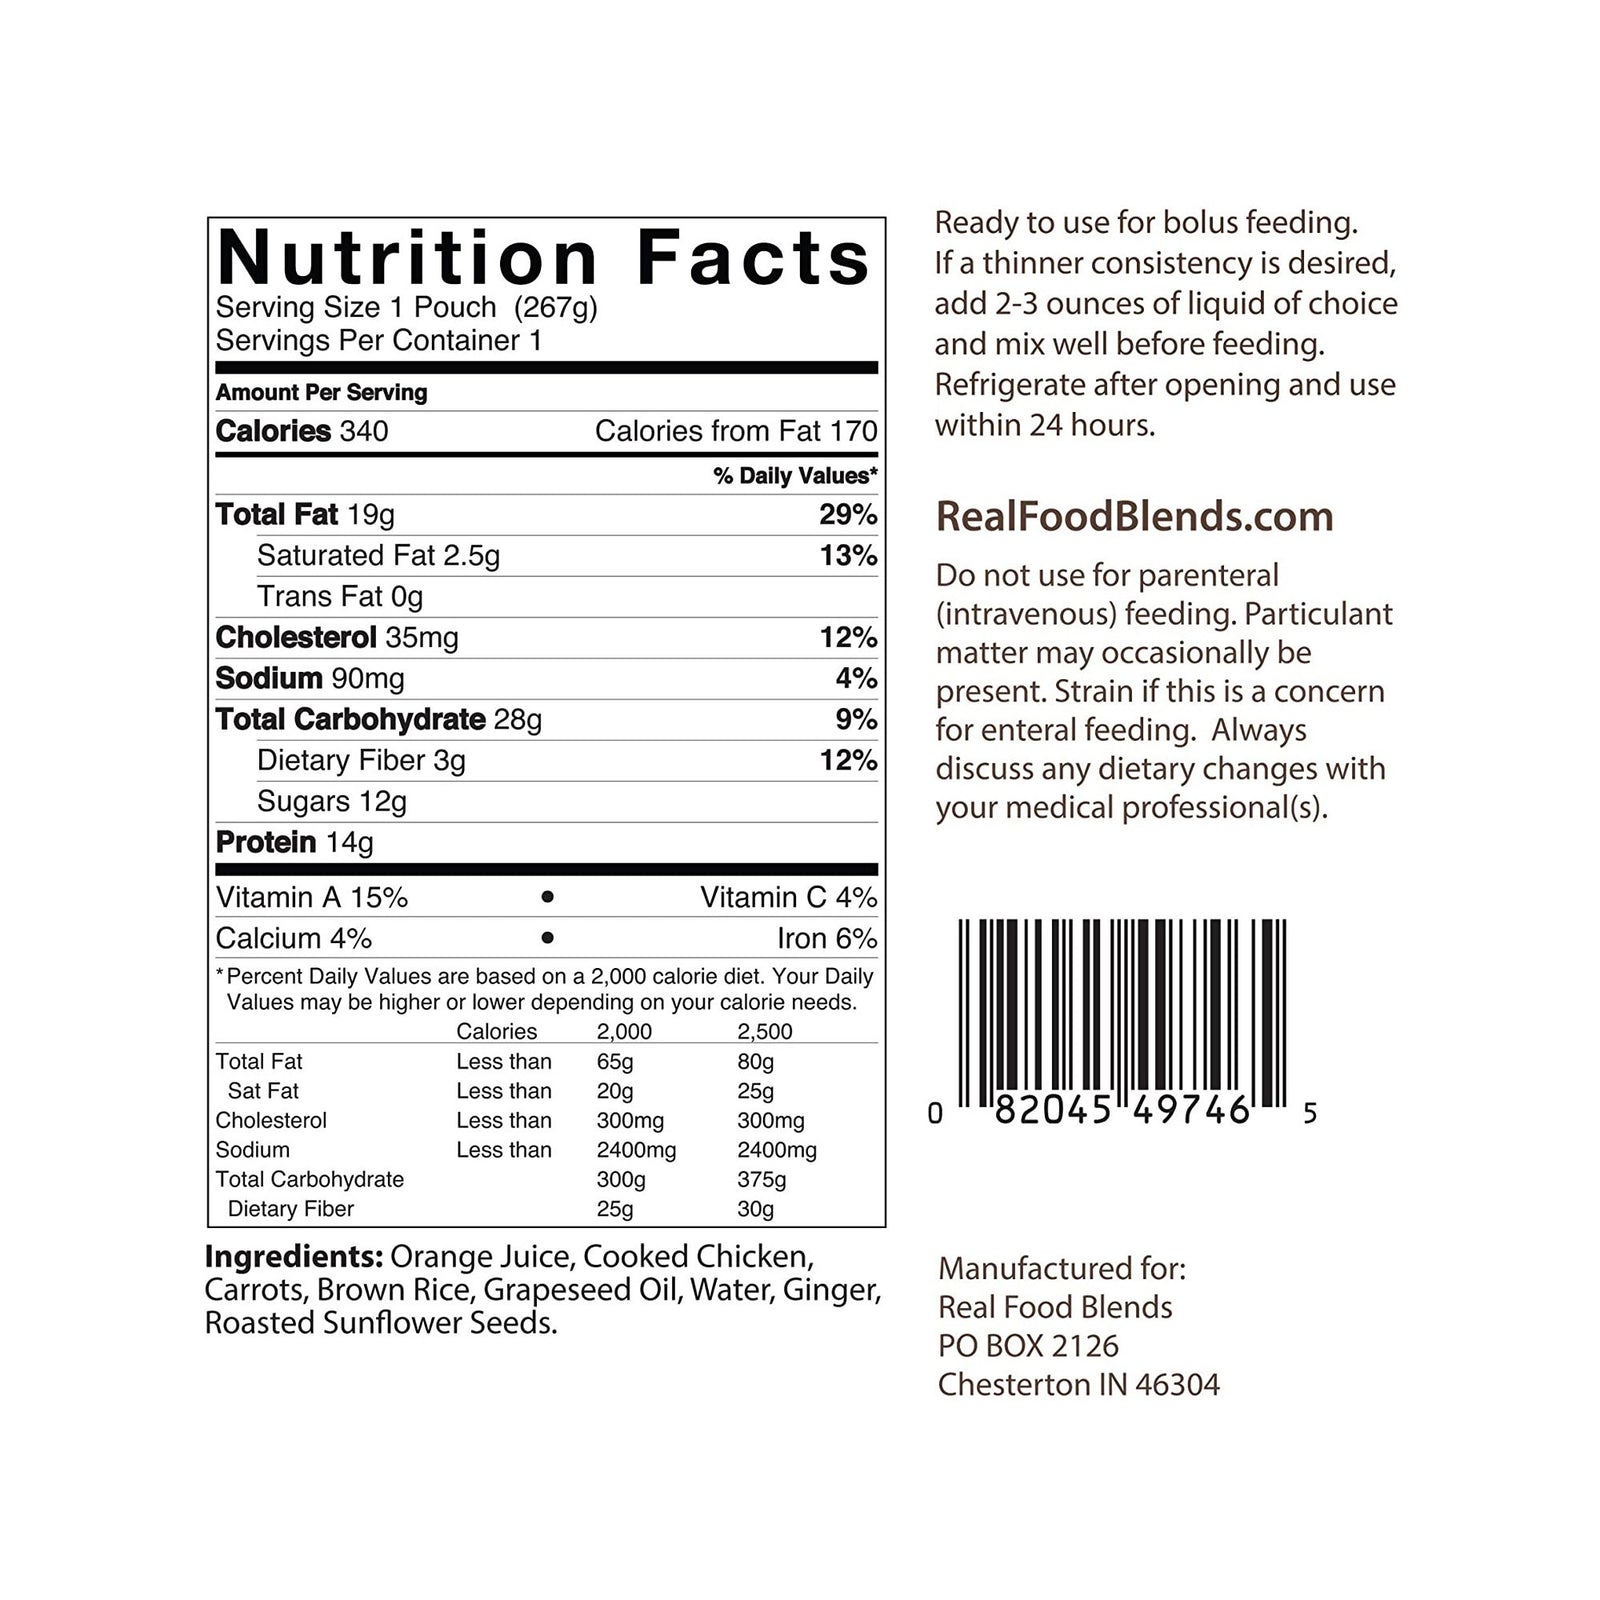 Real Food Blends Tube-Fed Meal Nutritional Supplement